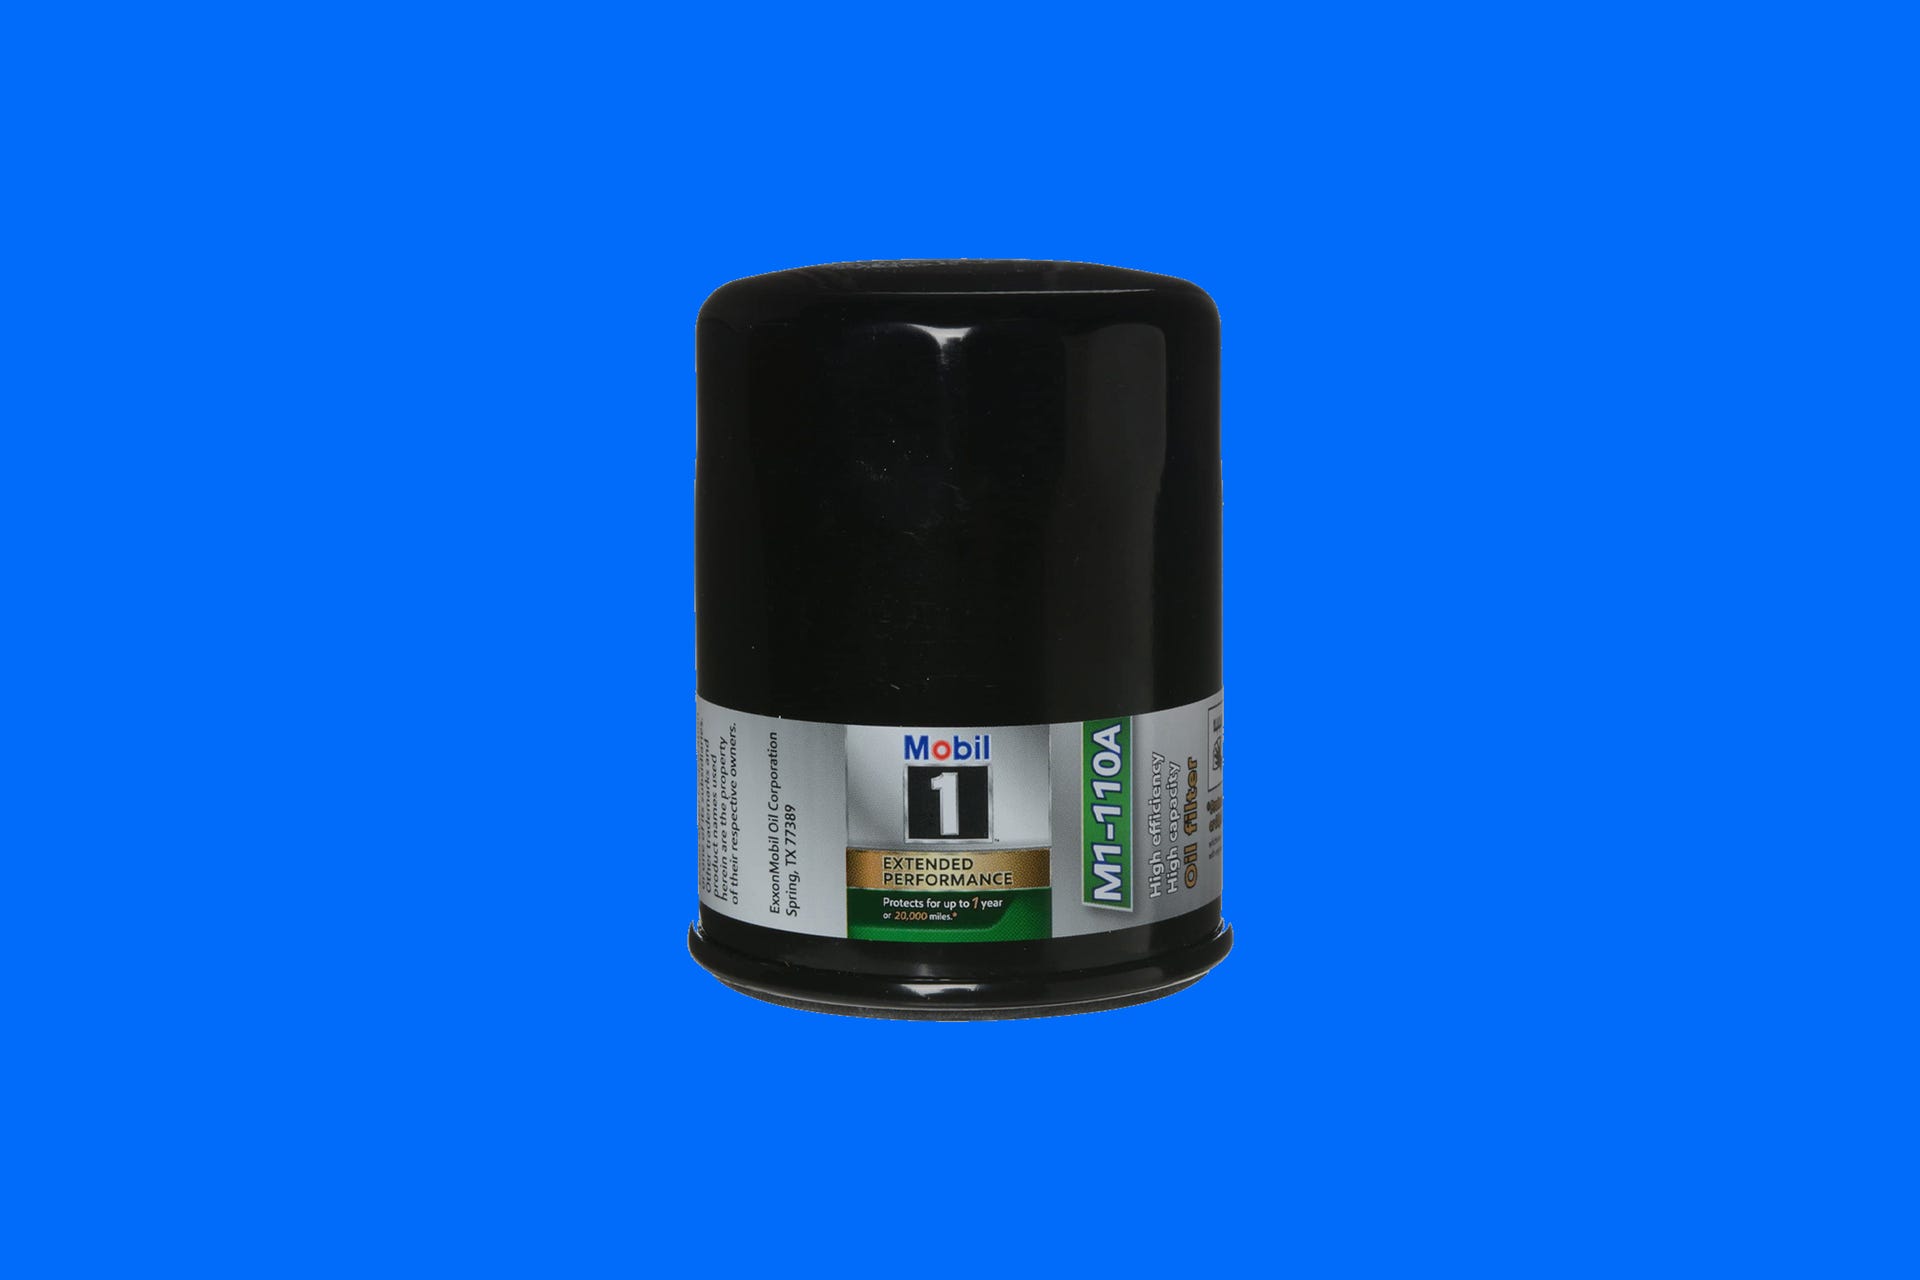 Mobil 1 Extended Performance Oil Filter on a blue background